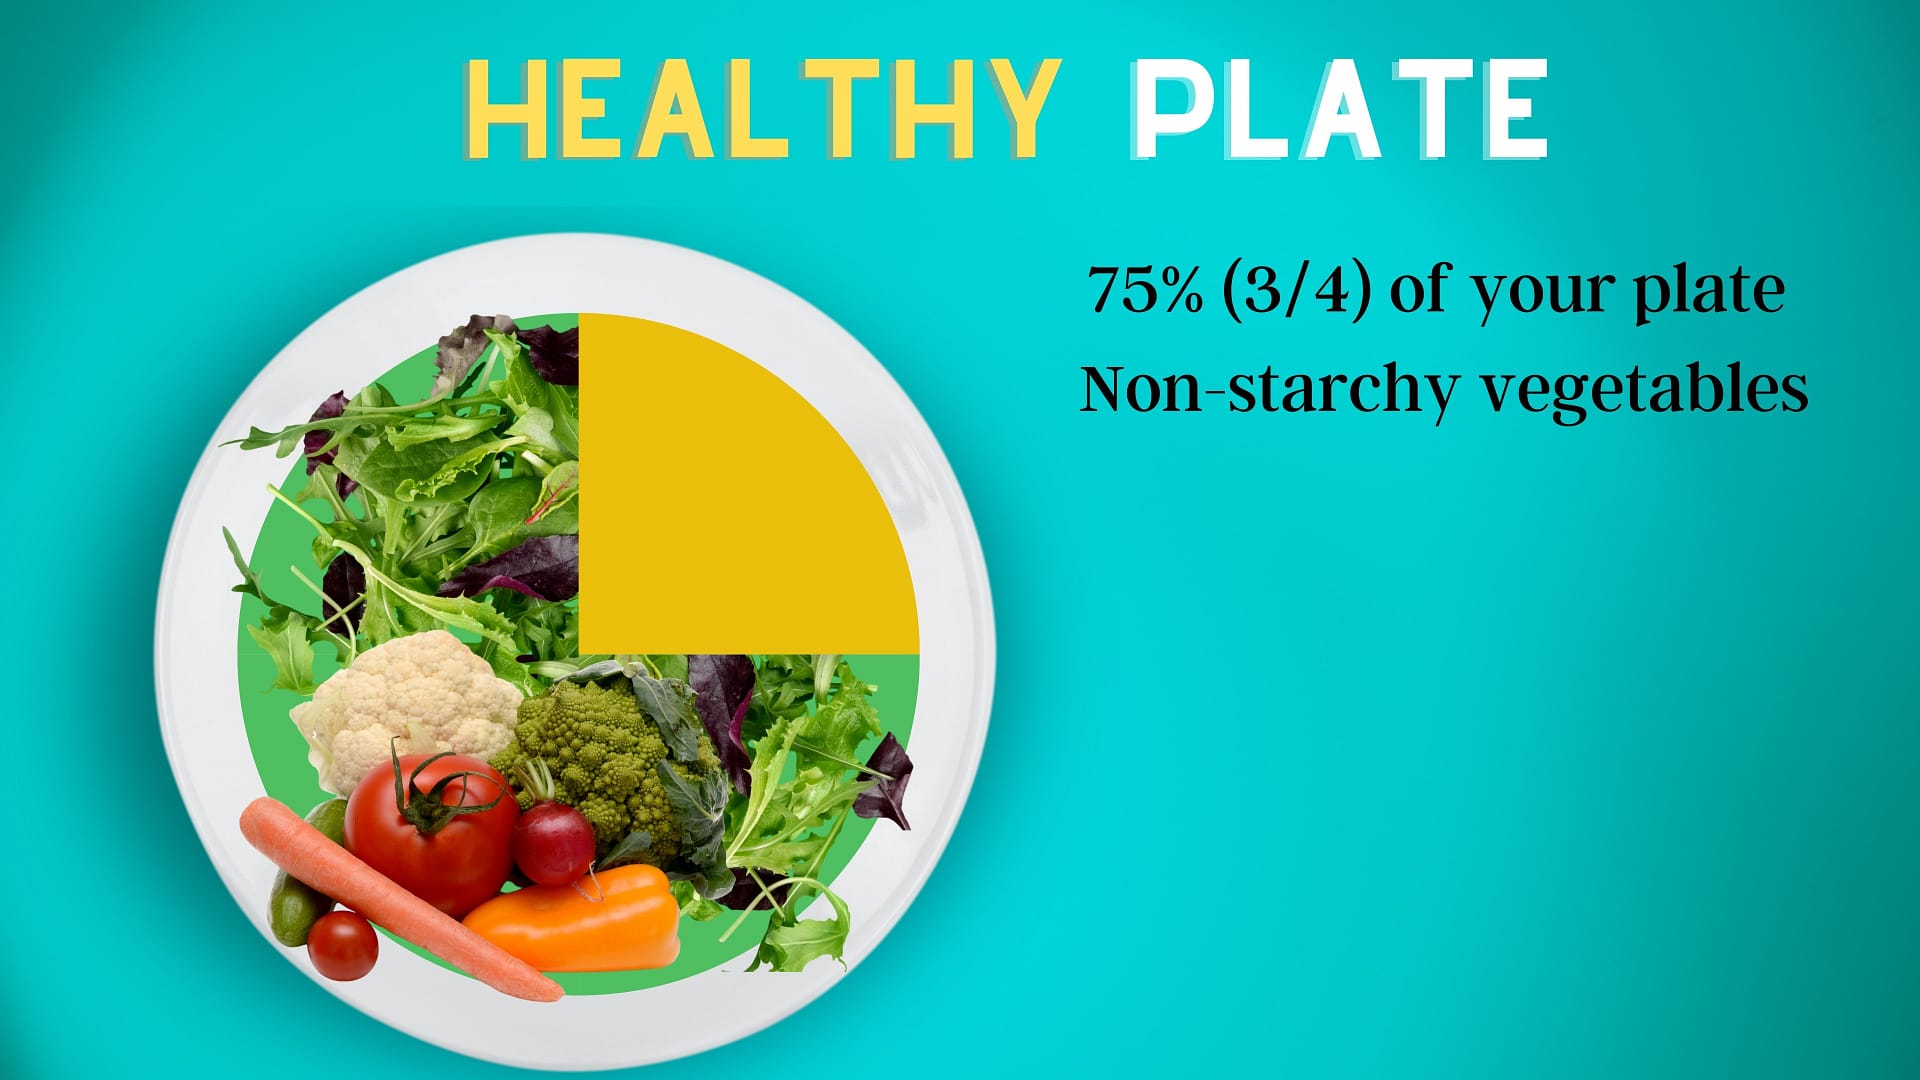 Start Your Healthy Plate by Filling It Up With Non-Starchy Vegetables.